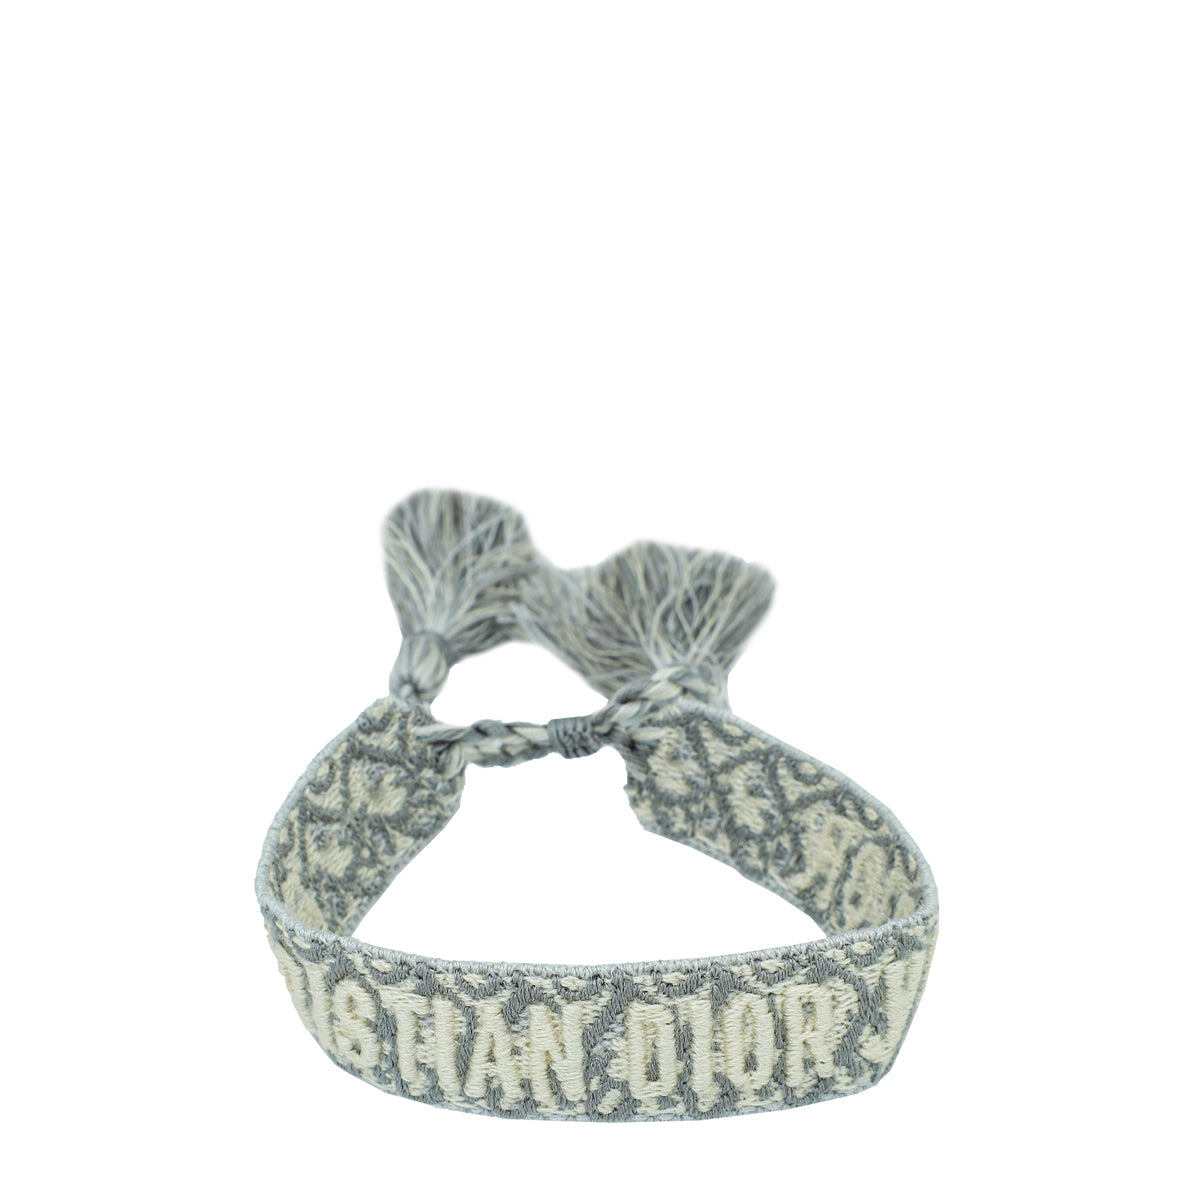 Christian Dior Multi Chain Petit CD Bracelet - $701 New With Tags - From  Kaka